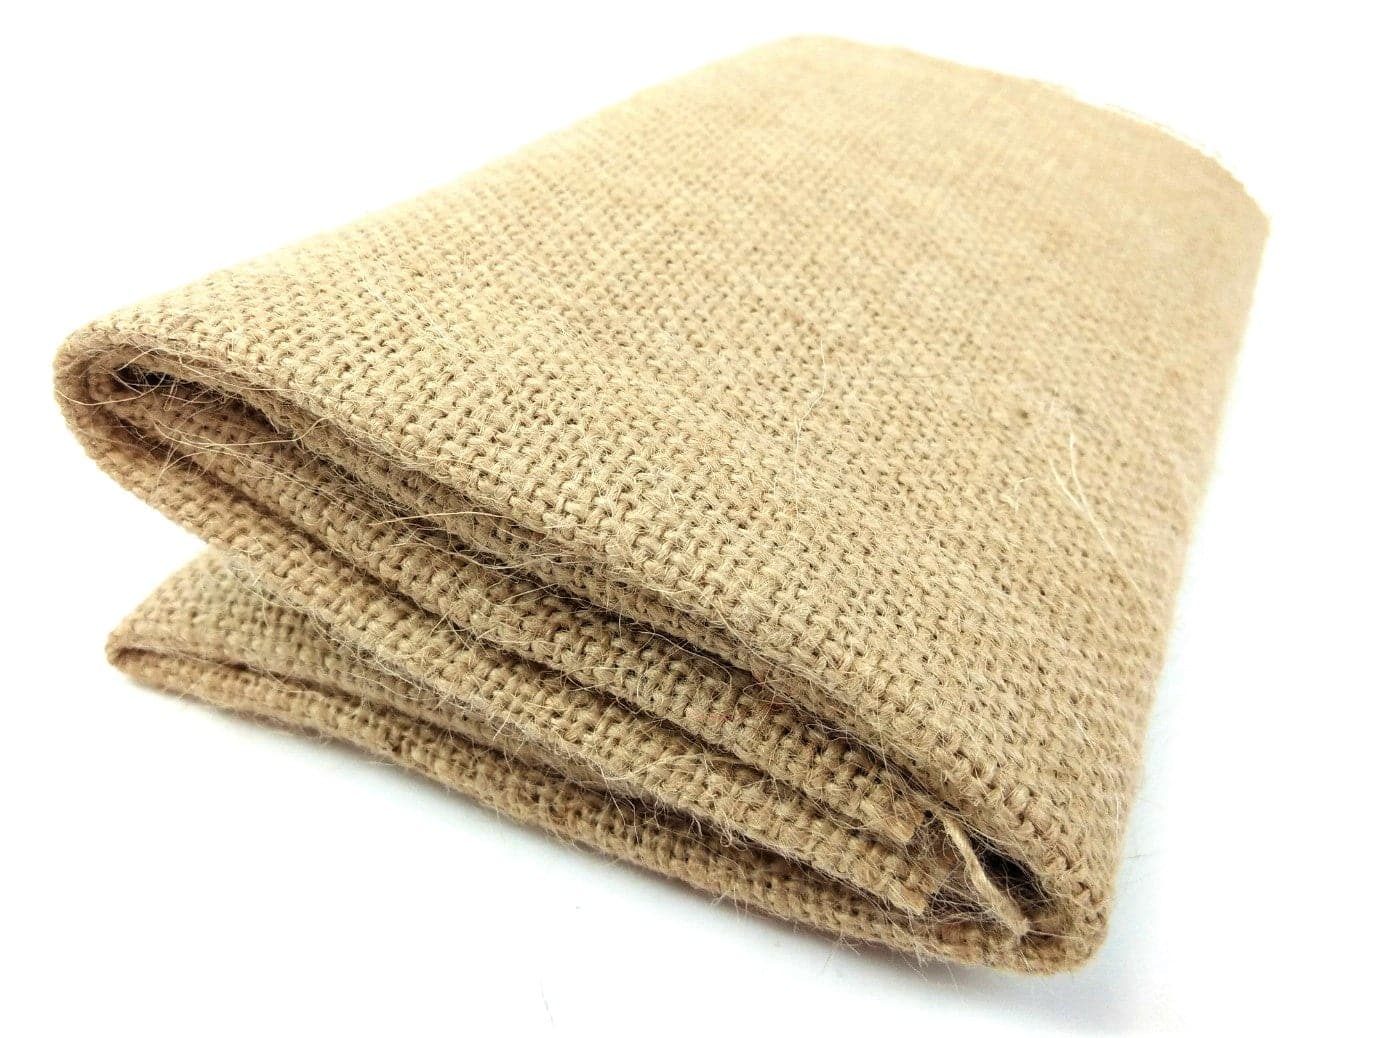 Hessian - Various Sizes for needle felt pictures, motifs, bunting - The Makerss